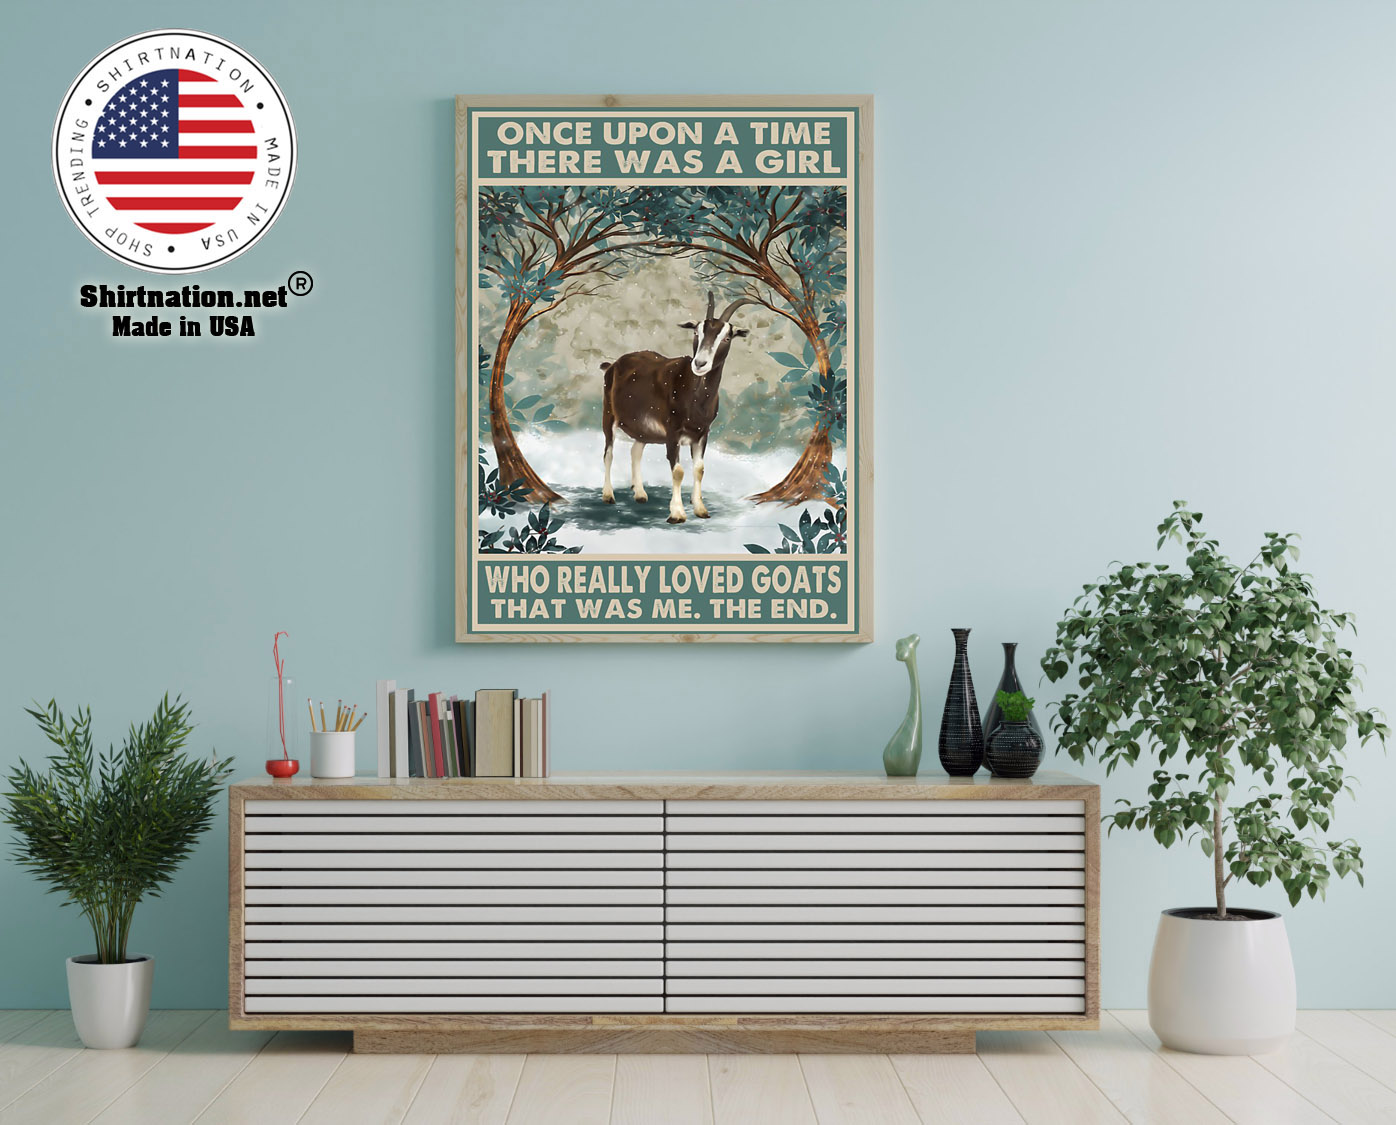 Once upon a time there was a girl who really loved goats poster